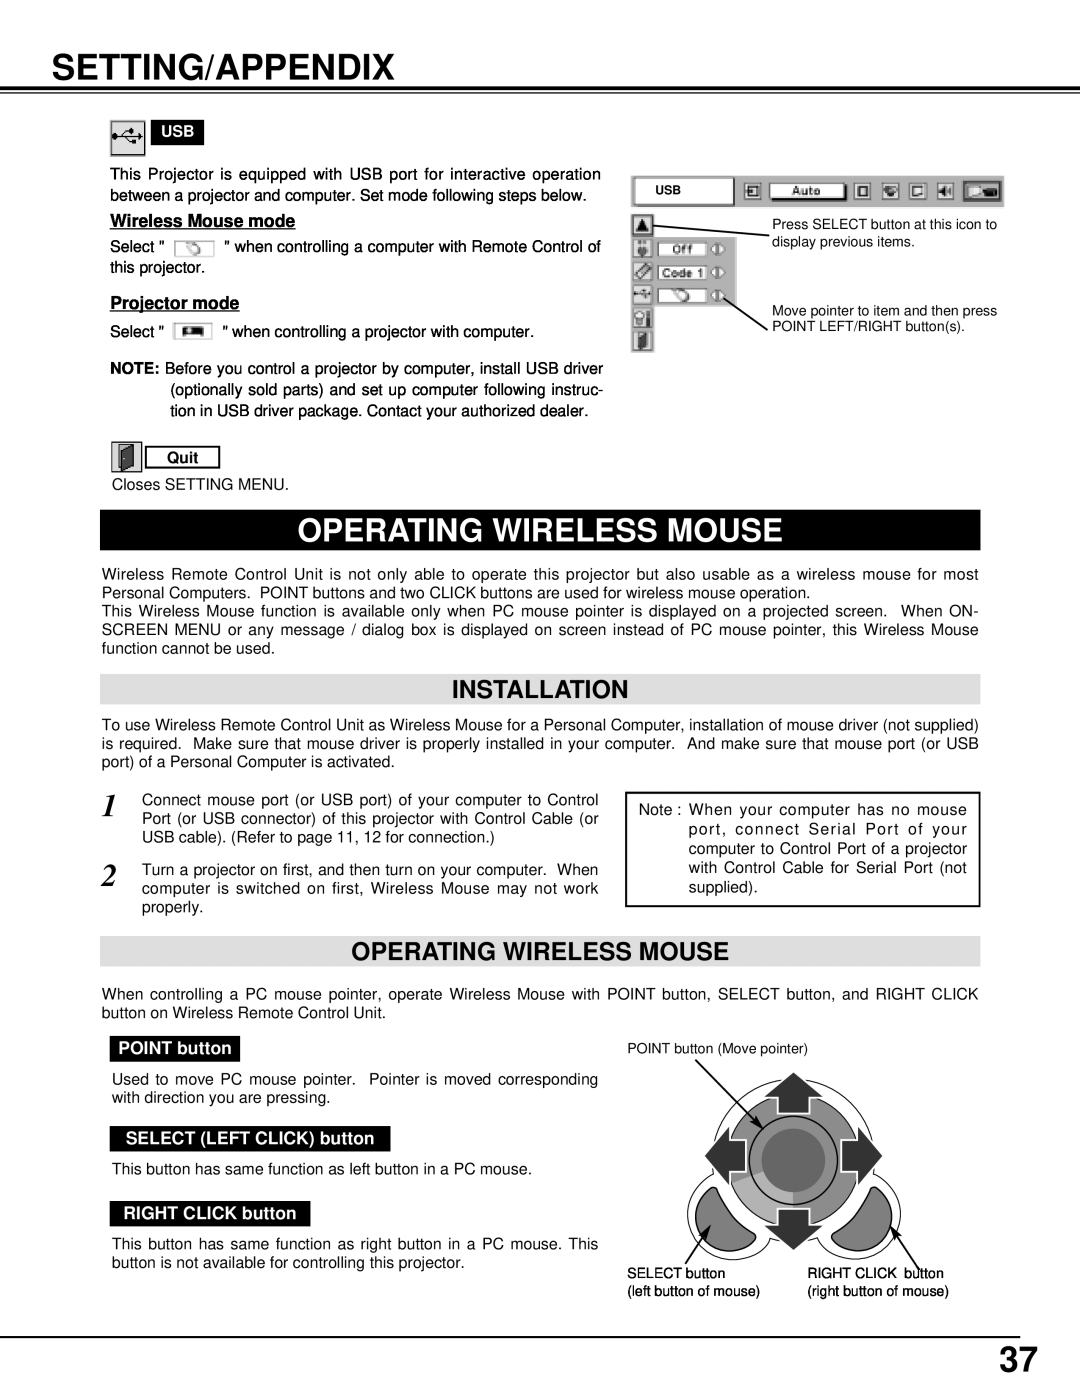 Eiki LC-X1000 instruction manual Setting/Appendix, Operating Wireless Mouse, Quit 